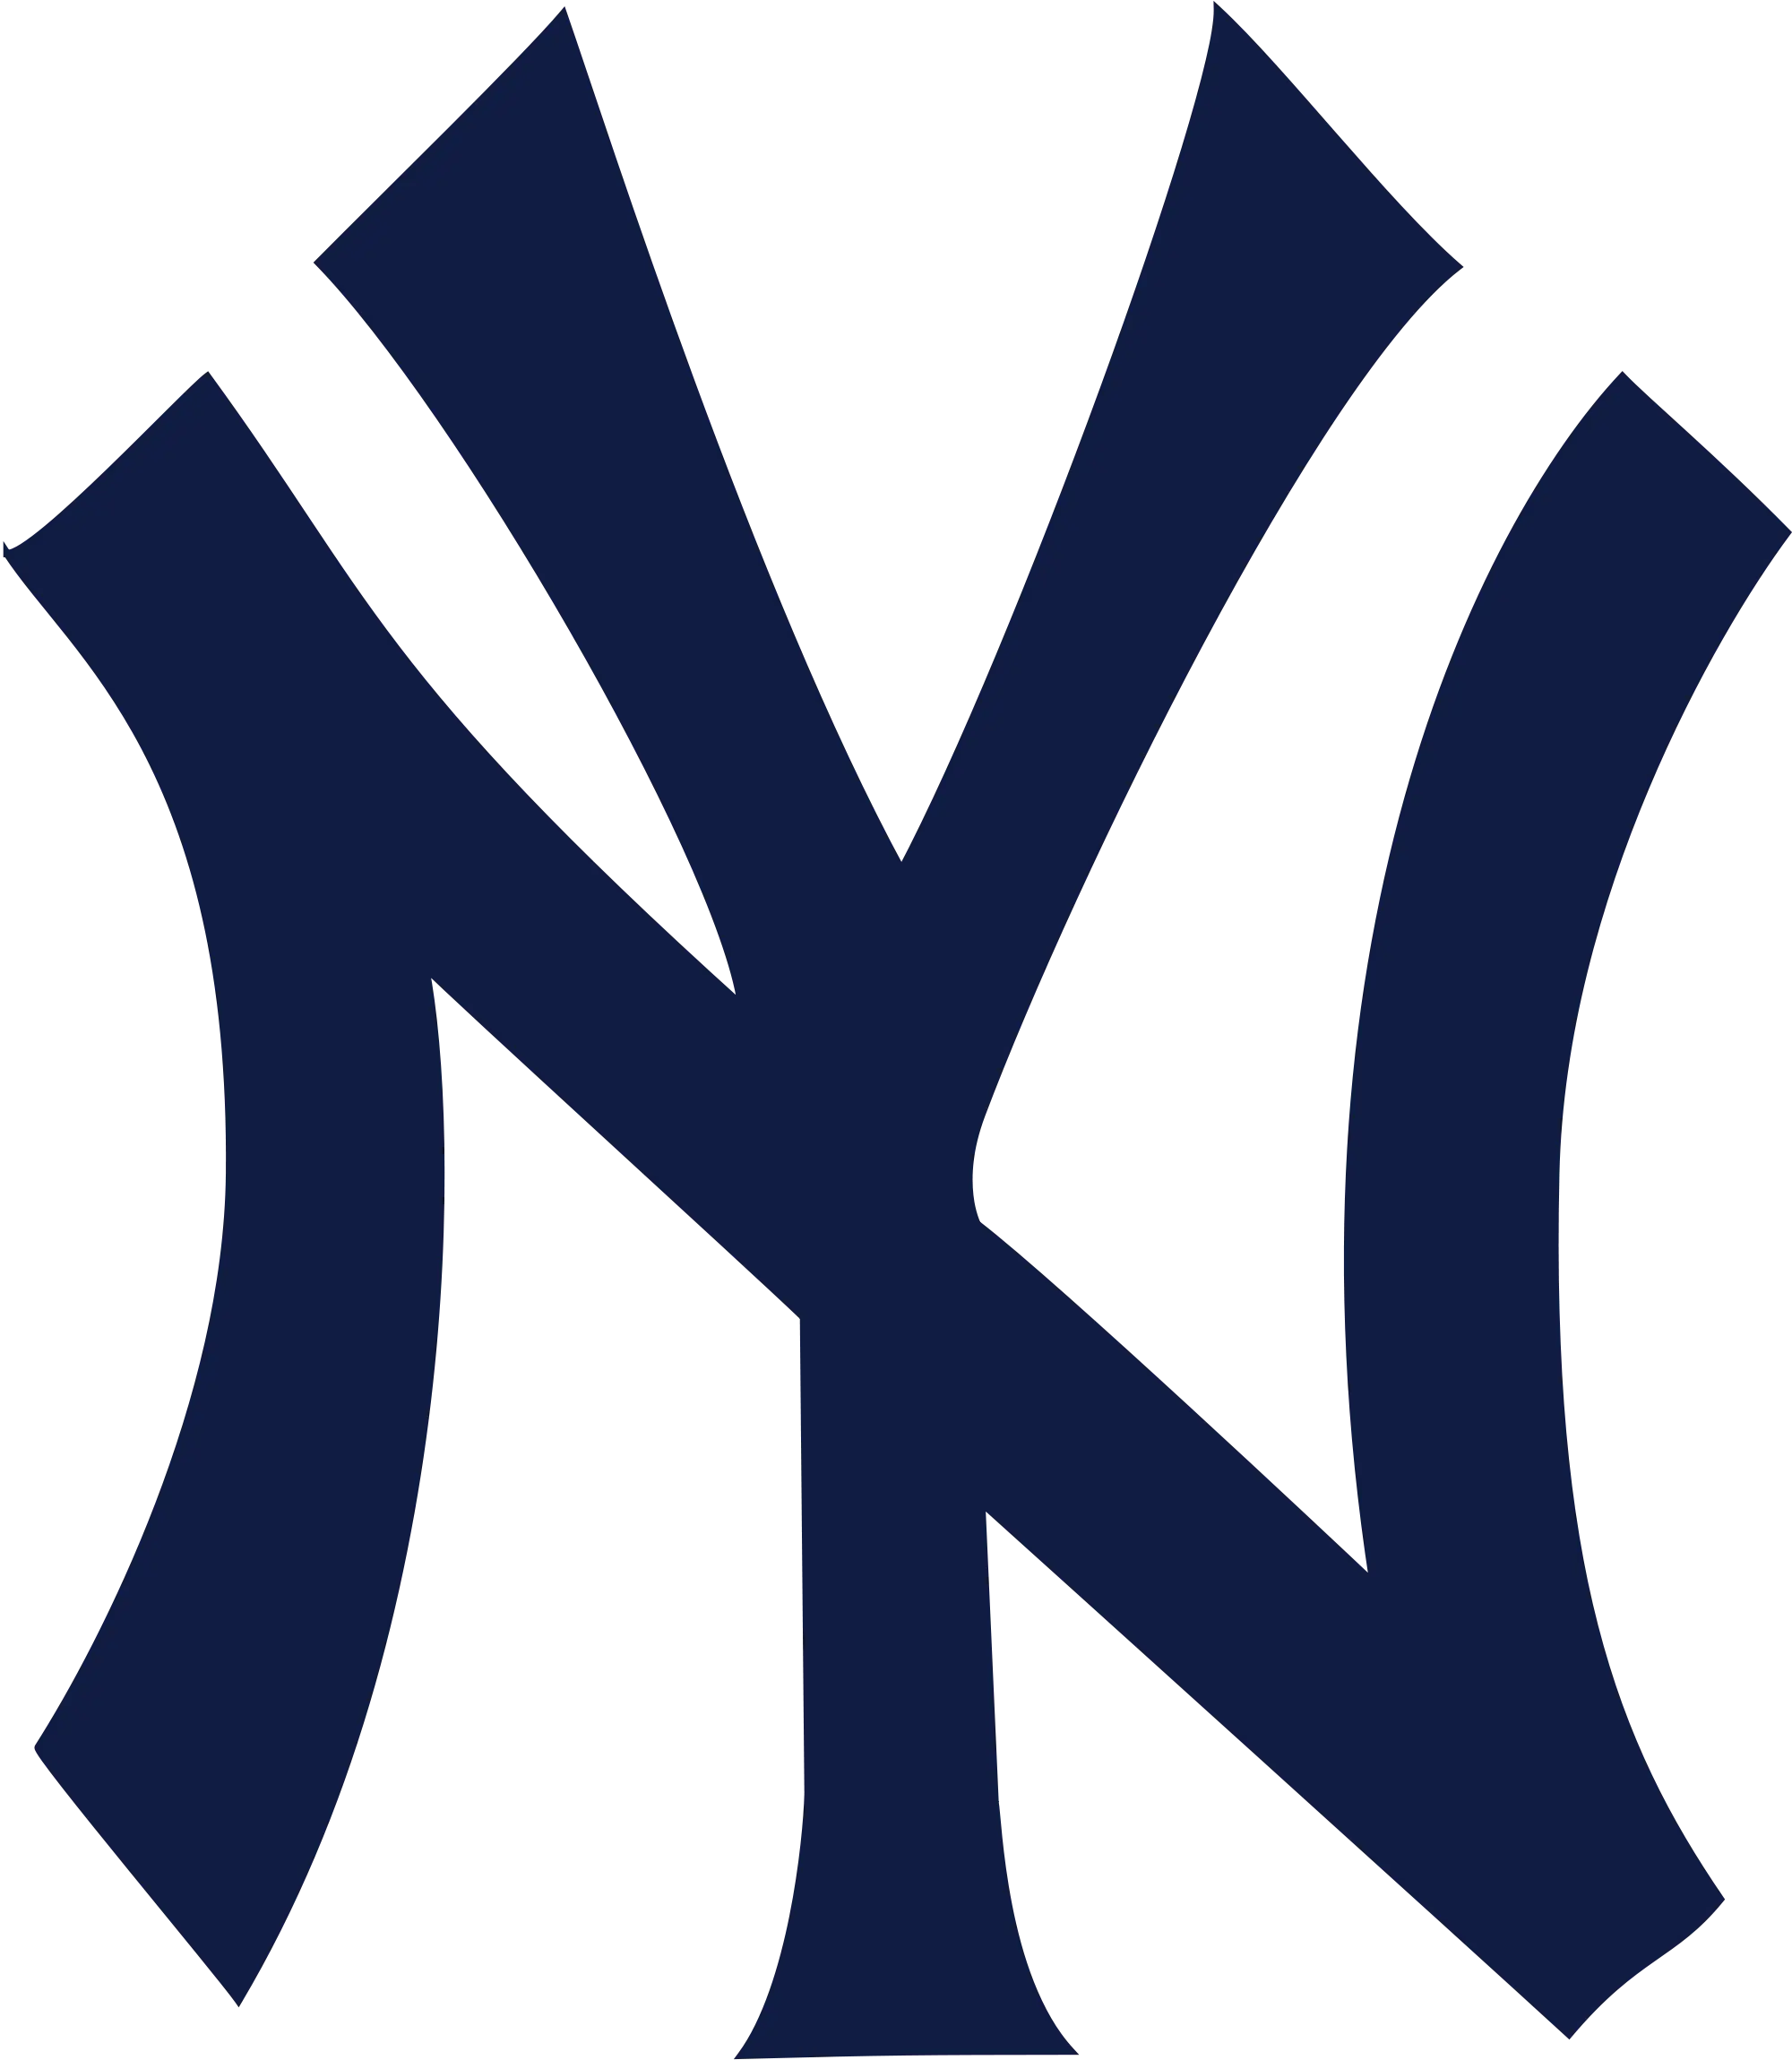 The Yankees' Top Hat Emblem and the Three Logos of 1946. — Todd